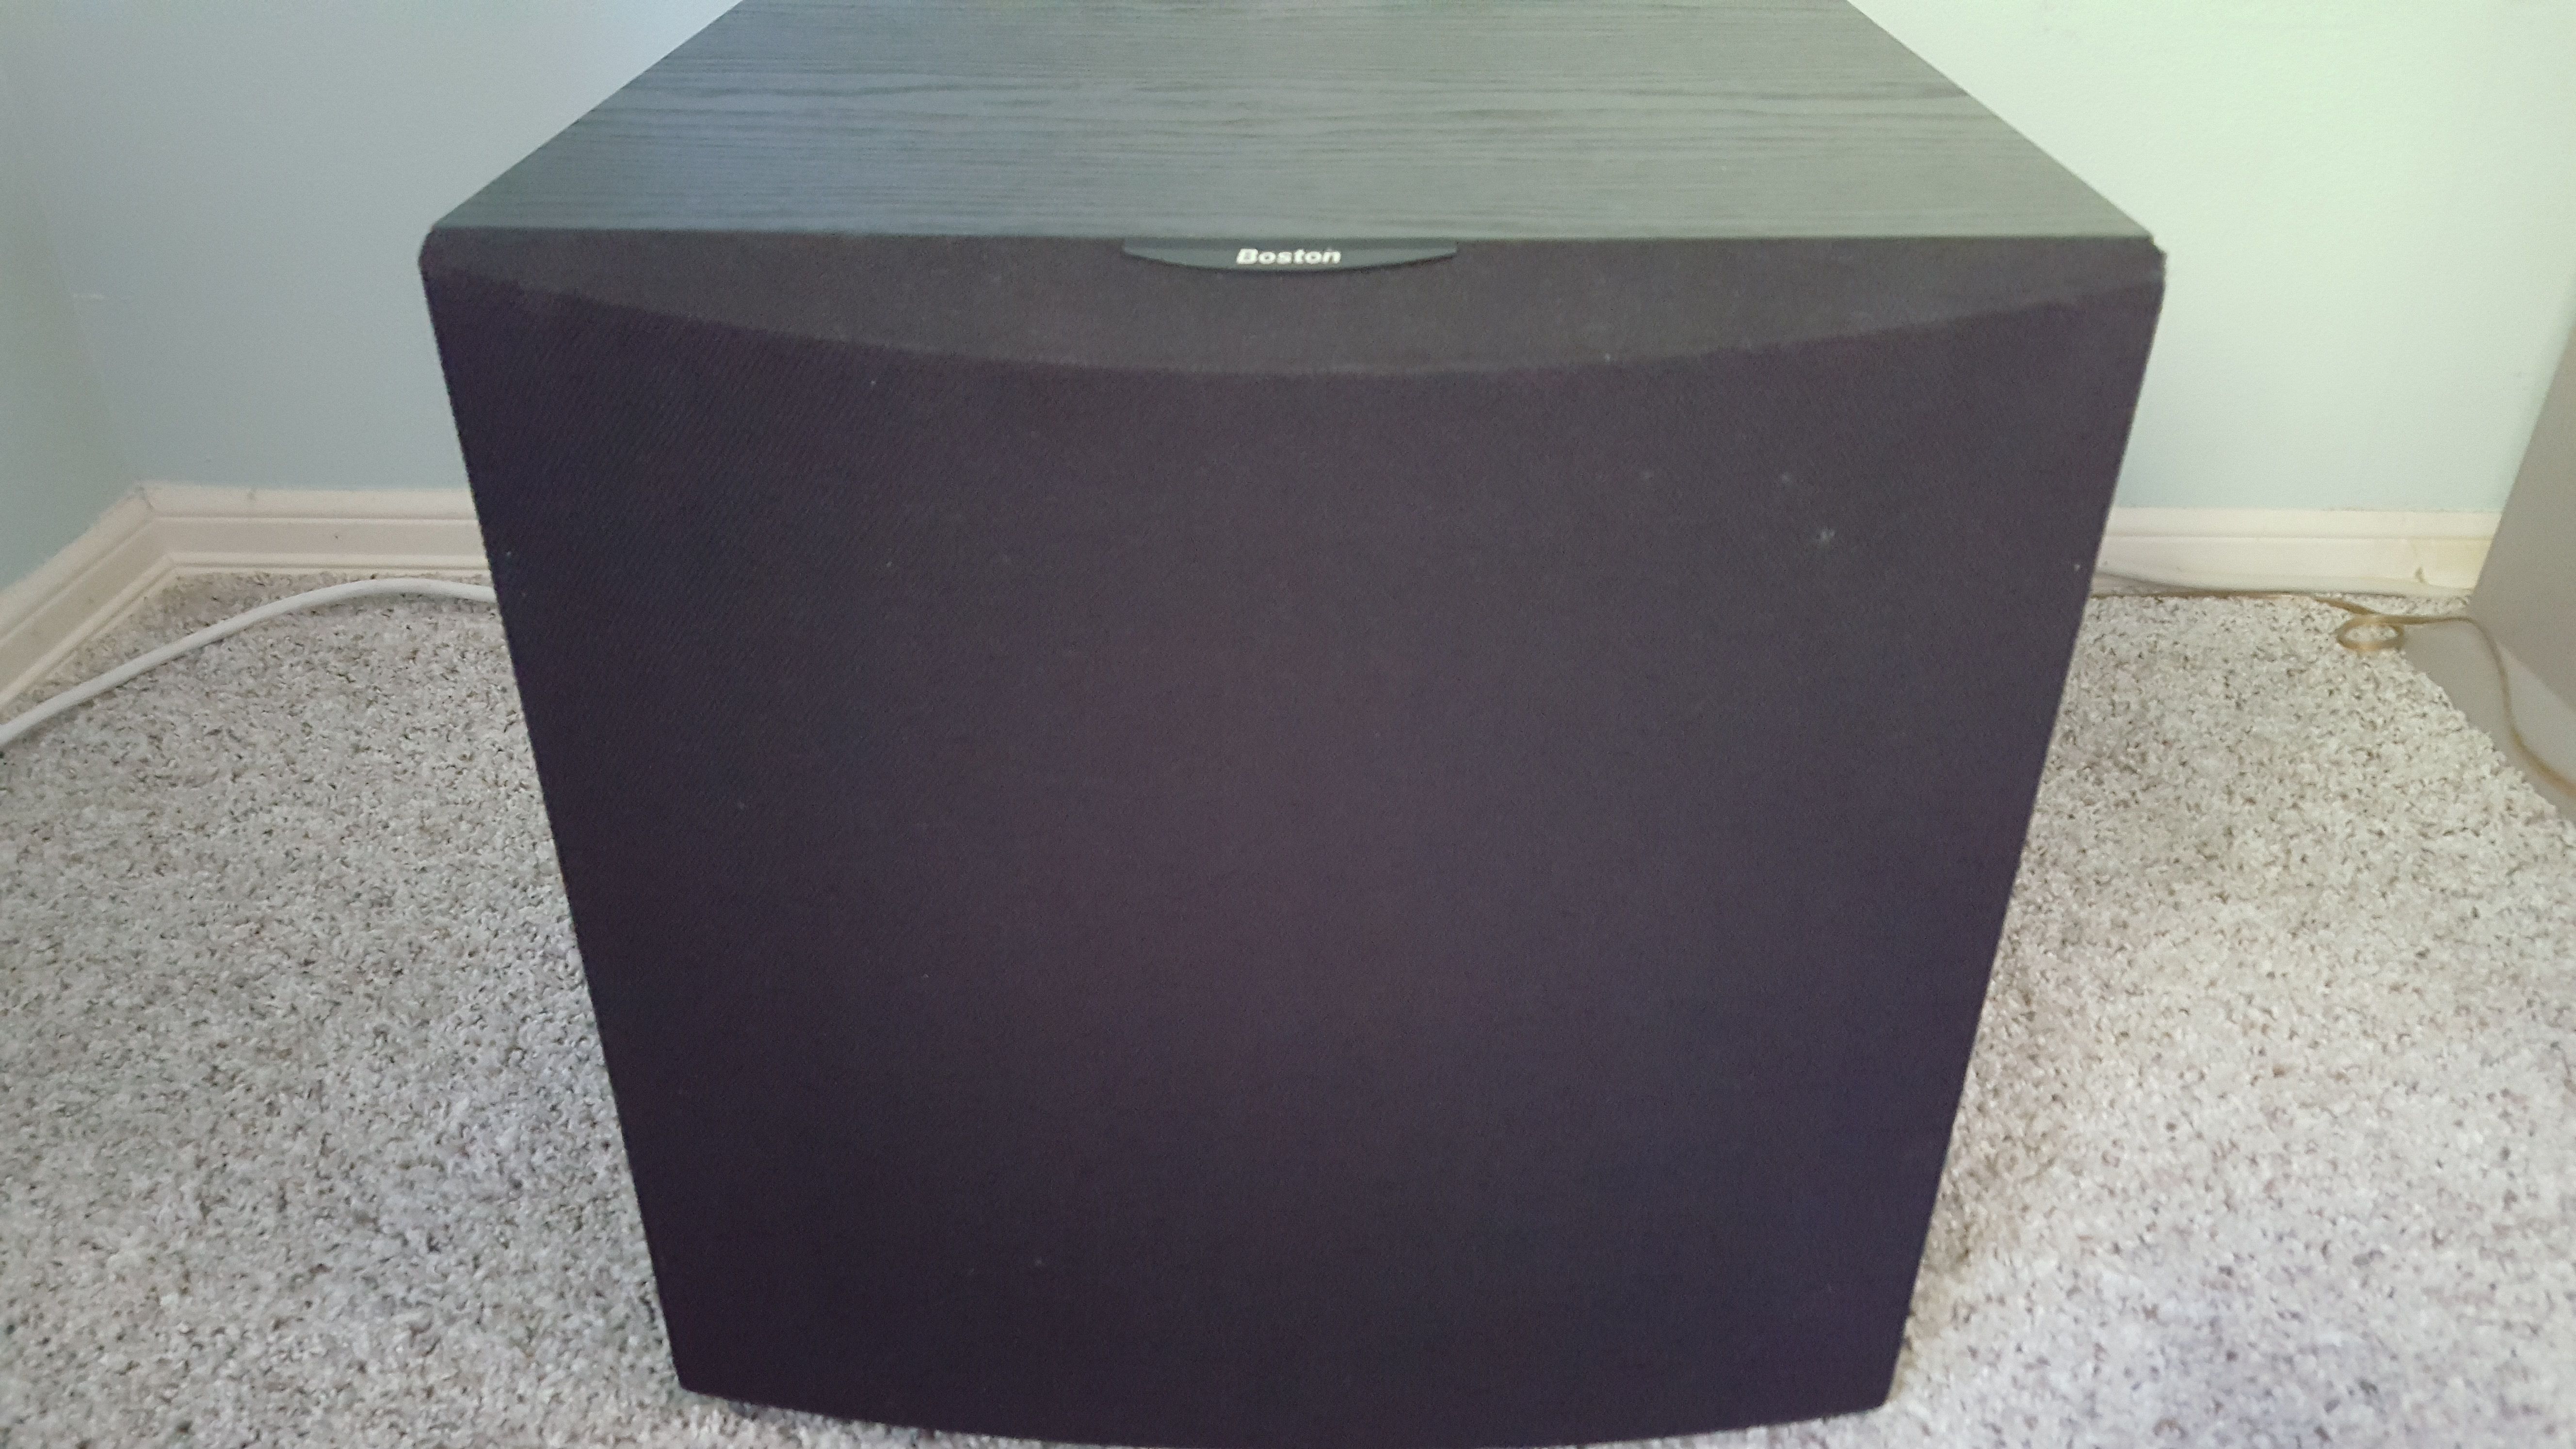 BOSTON ACOUSTICS MICRO90PV POWERED SUBWOOFER - NEW